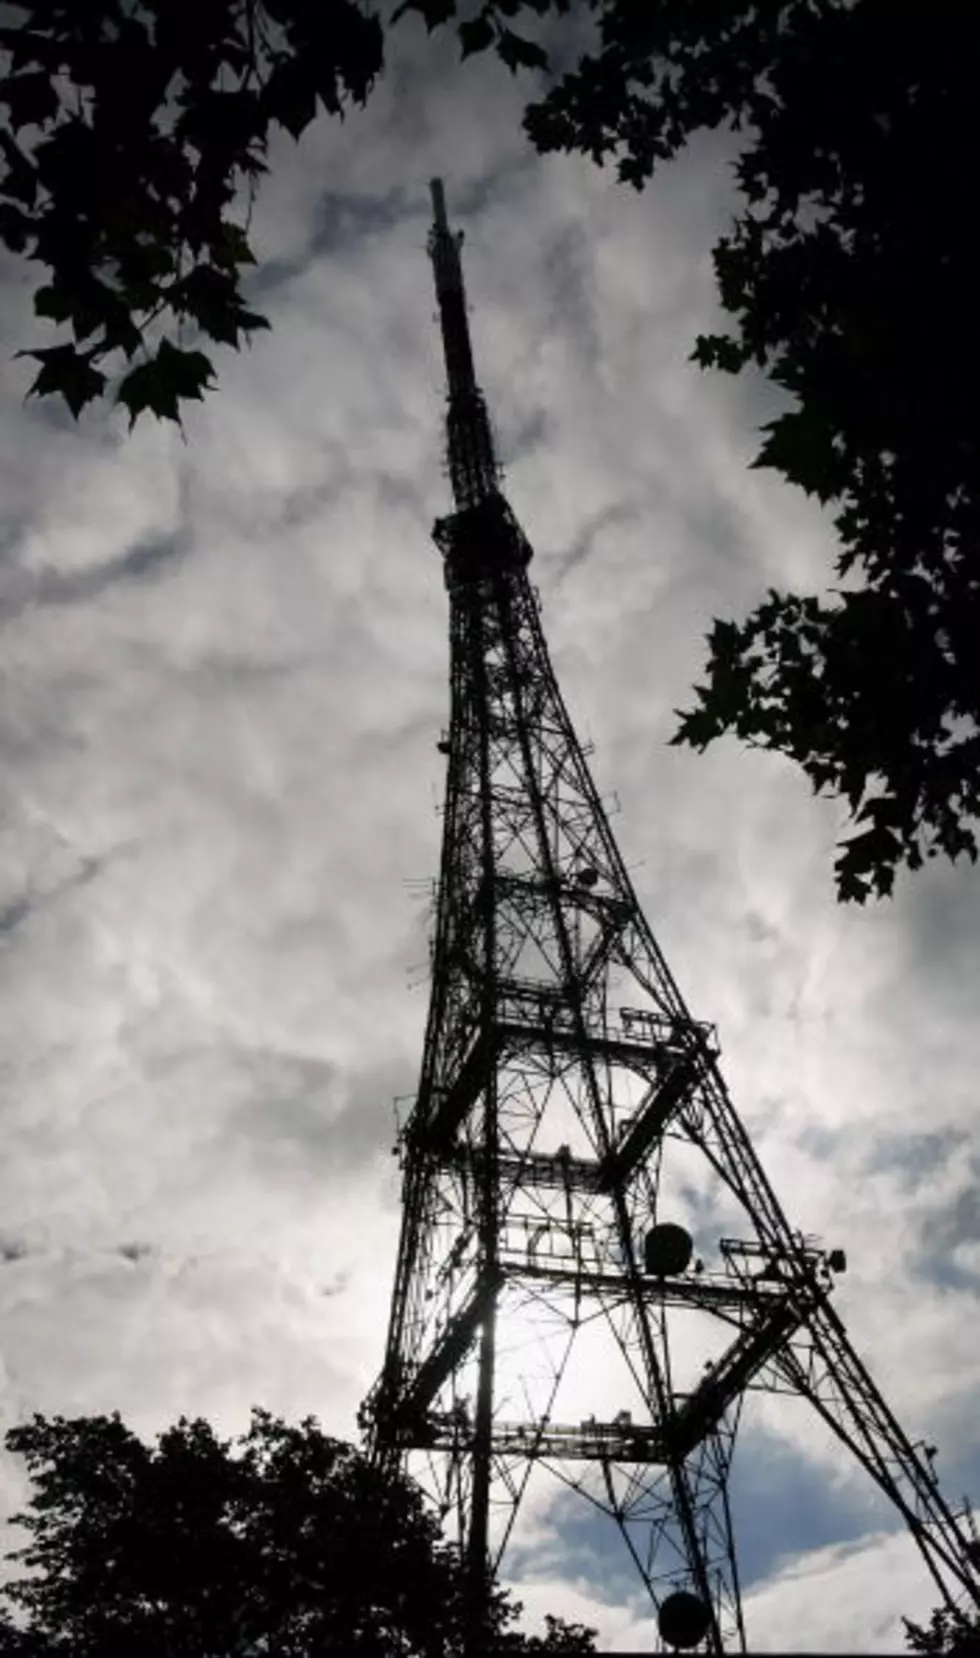 See What It’s Like To Climb A Radio Tower! [Video]